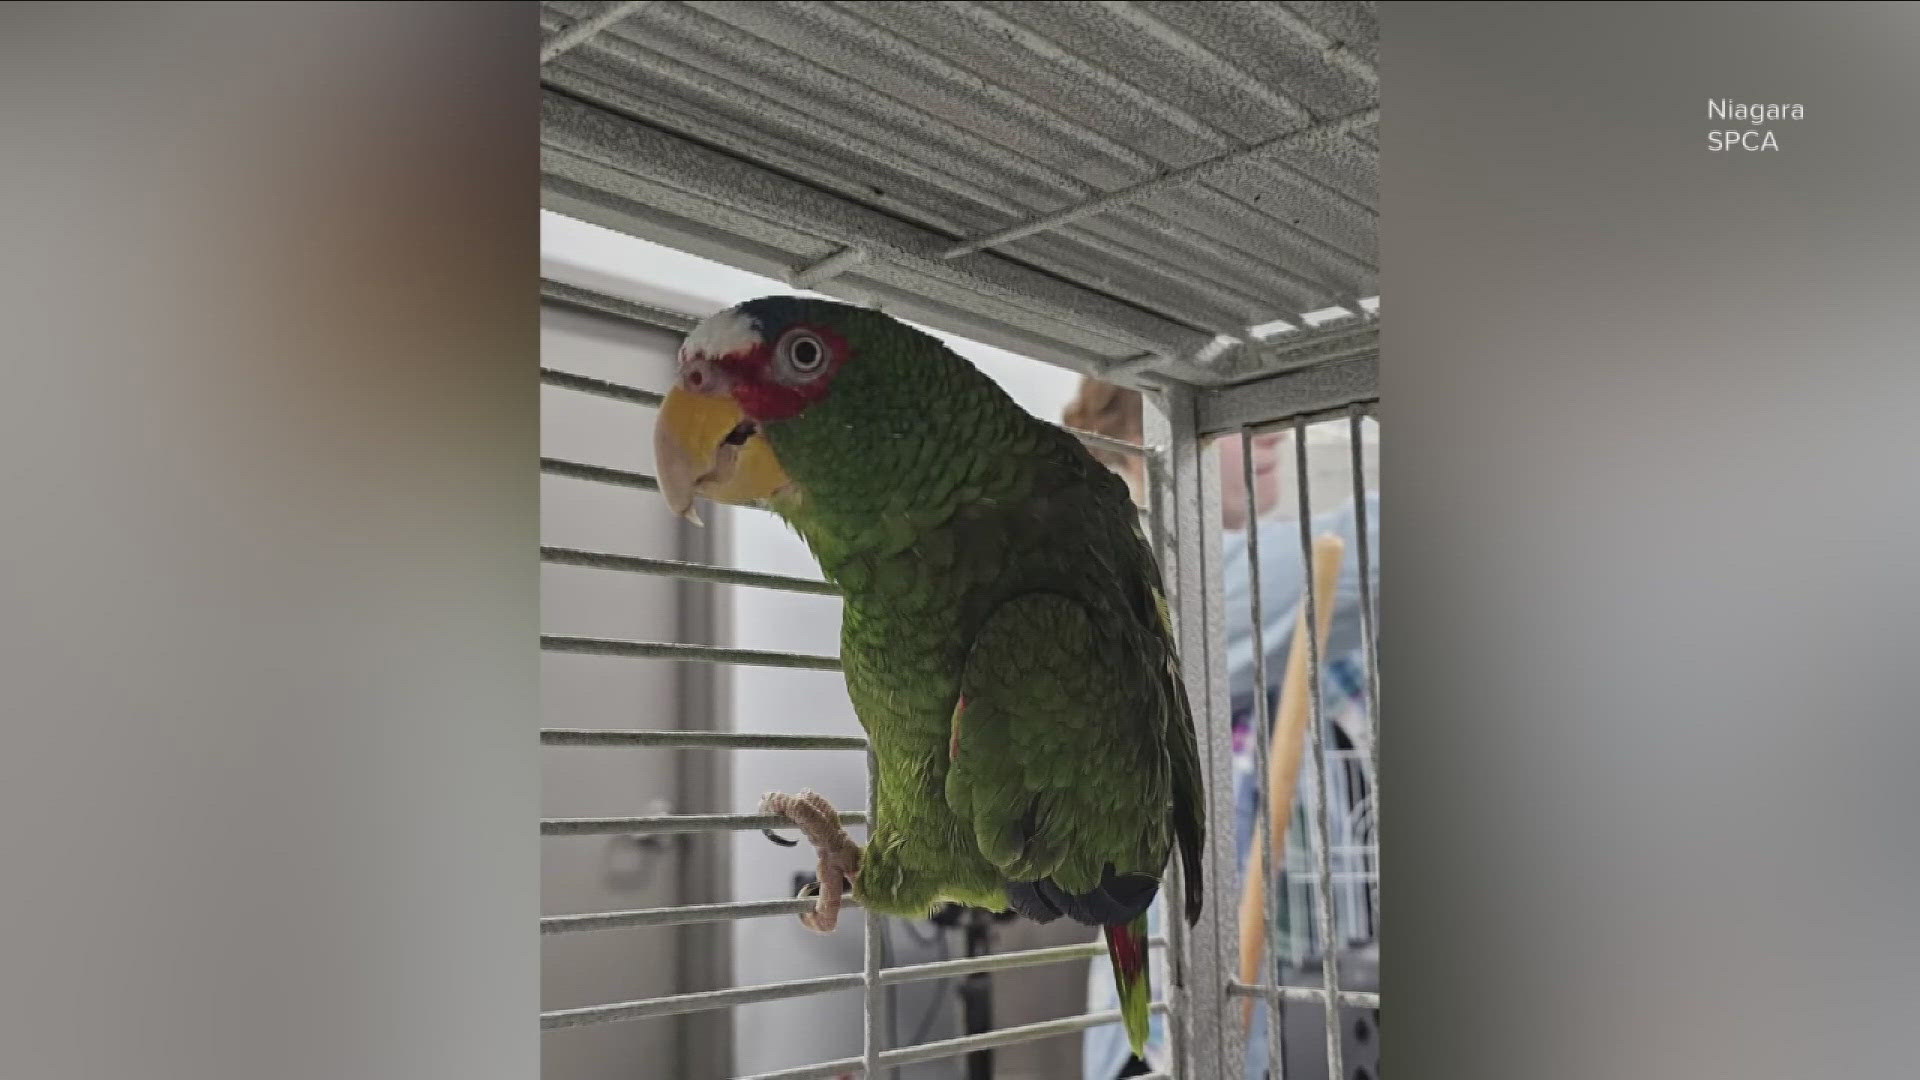 There's been more than 400 inquiries about the potty-mouthed parrot.